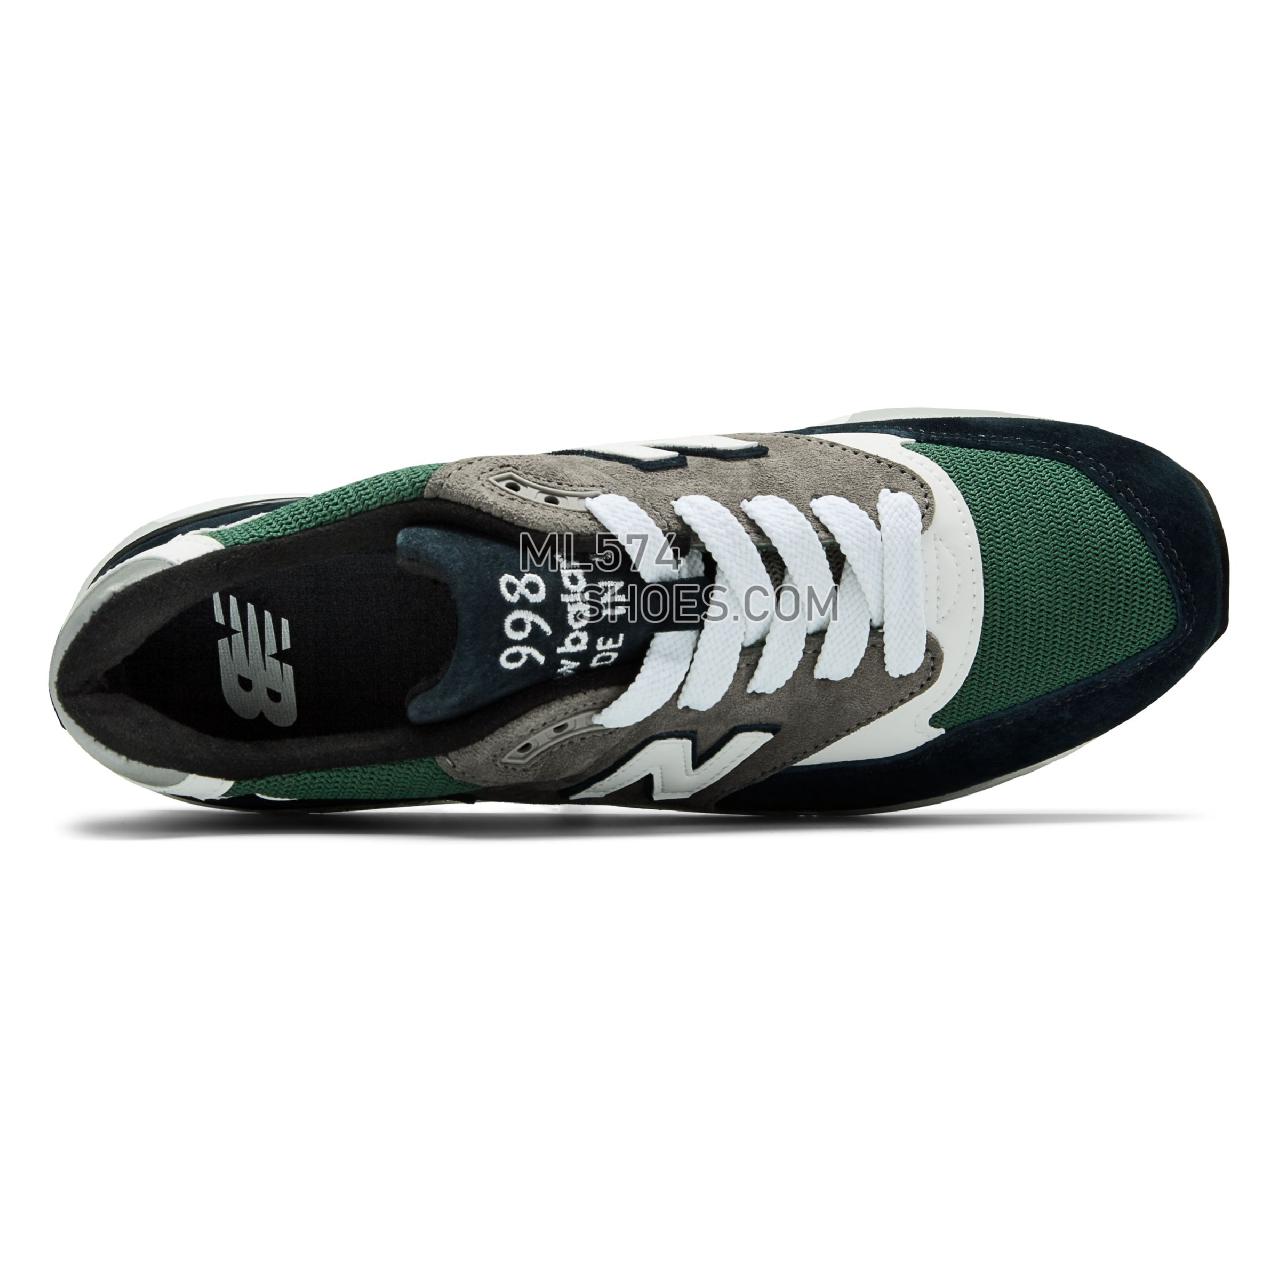 New Balance 998 Made in US - Men's 998 - Classic Galaxy with Team Forest Green - M998NL